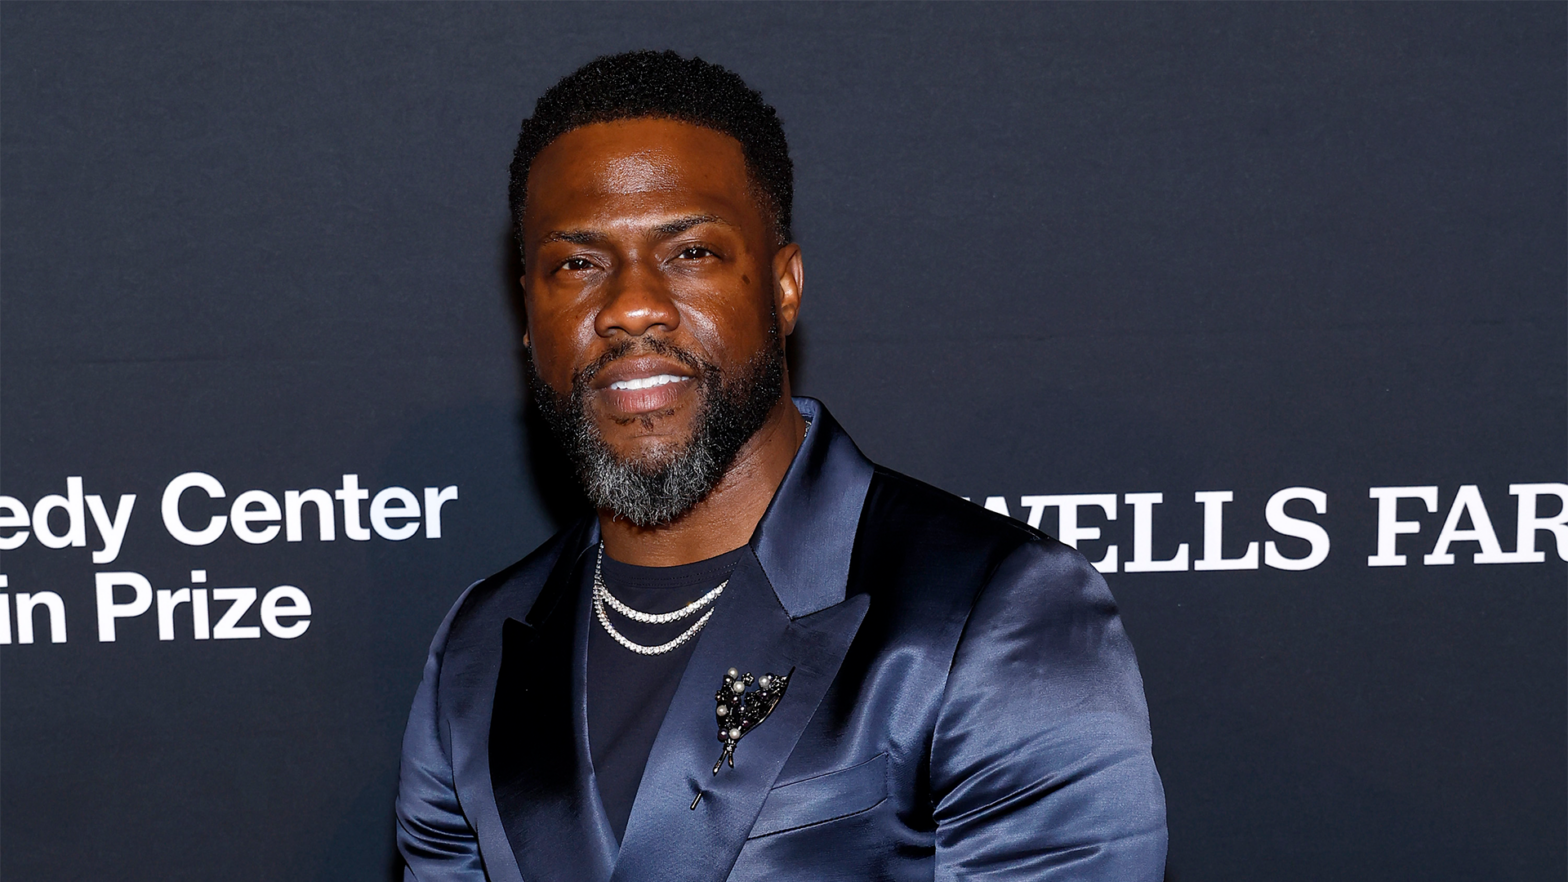 with a company reportedly valued at $650m as of 2022, kevin hart says he’s ‘no longer just a comedian’ — ‘i’m an investment. i’m a studio’